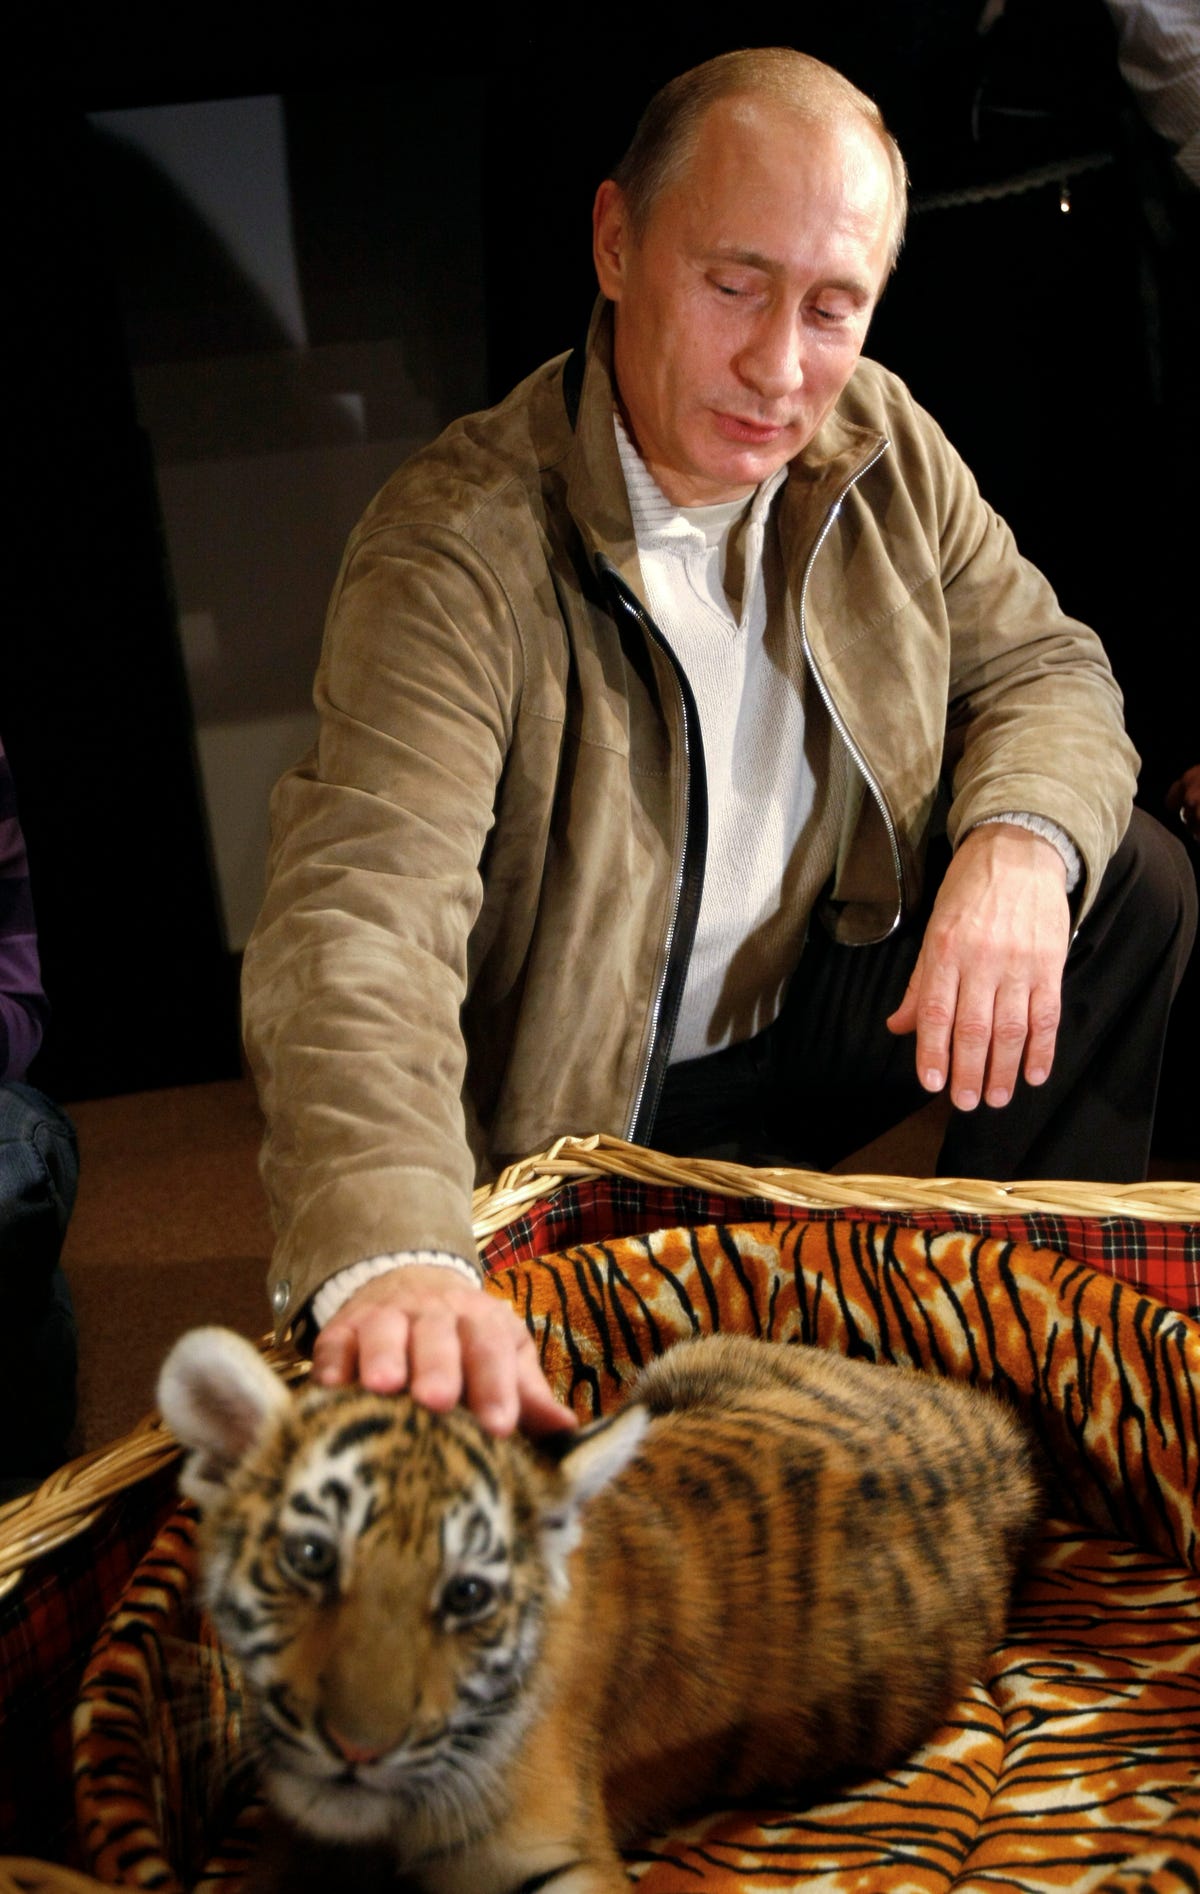 theres-also-a-softer-side-to-the-russian-president-here-putin-strokes-a-two-month-old-tiger-cub-he-received-as-a-birthday-present-at-his-novo-ogaryovo-residence-outside-of-moscow-it-will-soon-go-to-a-zoo.jpg